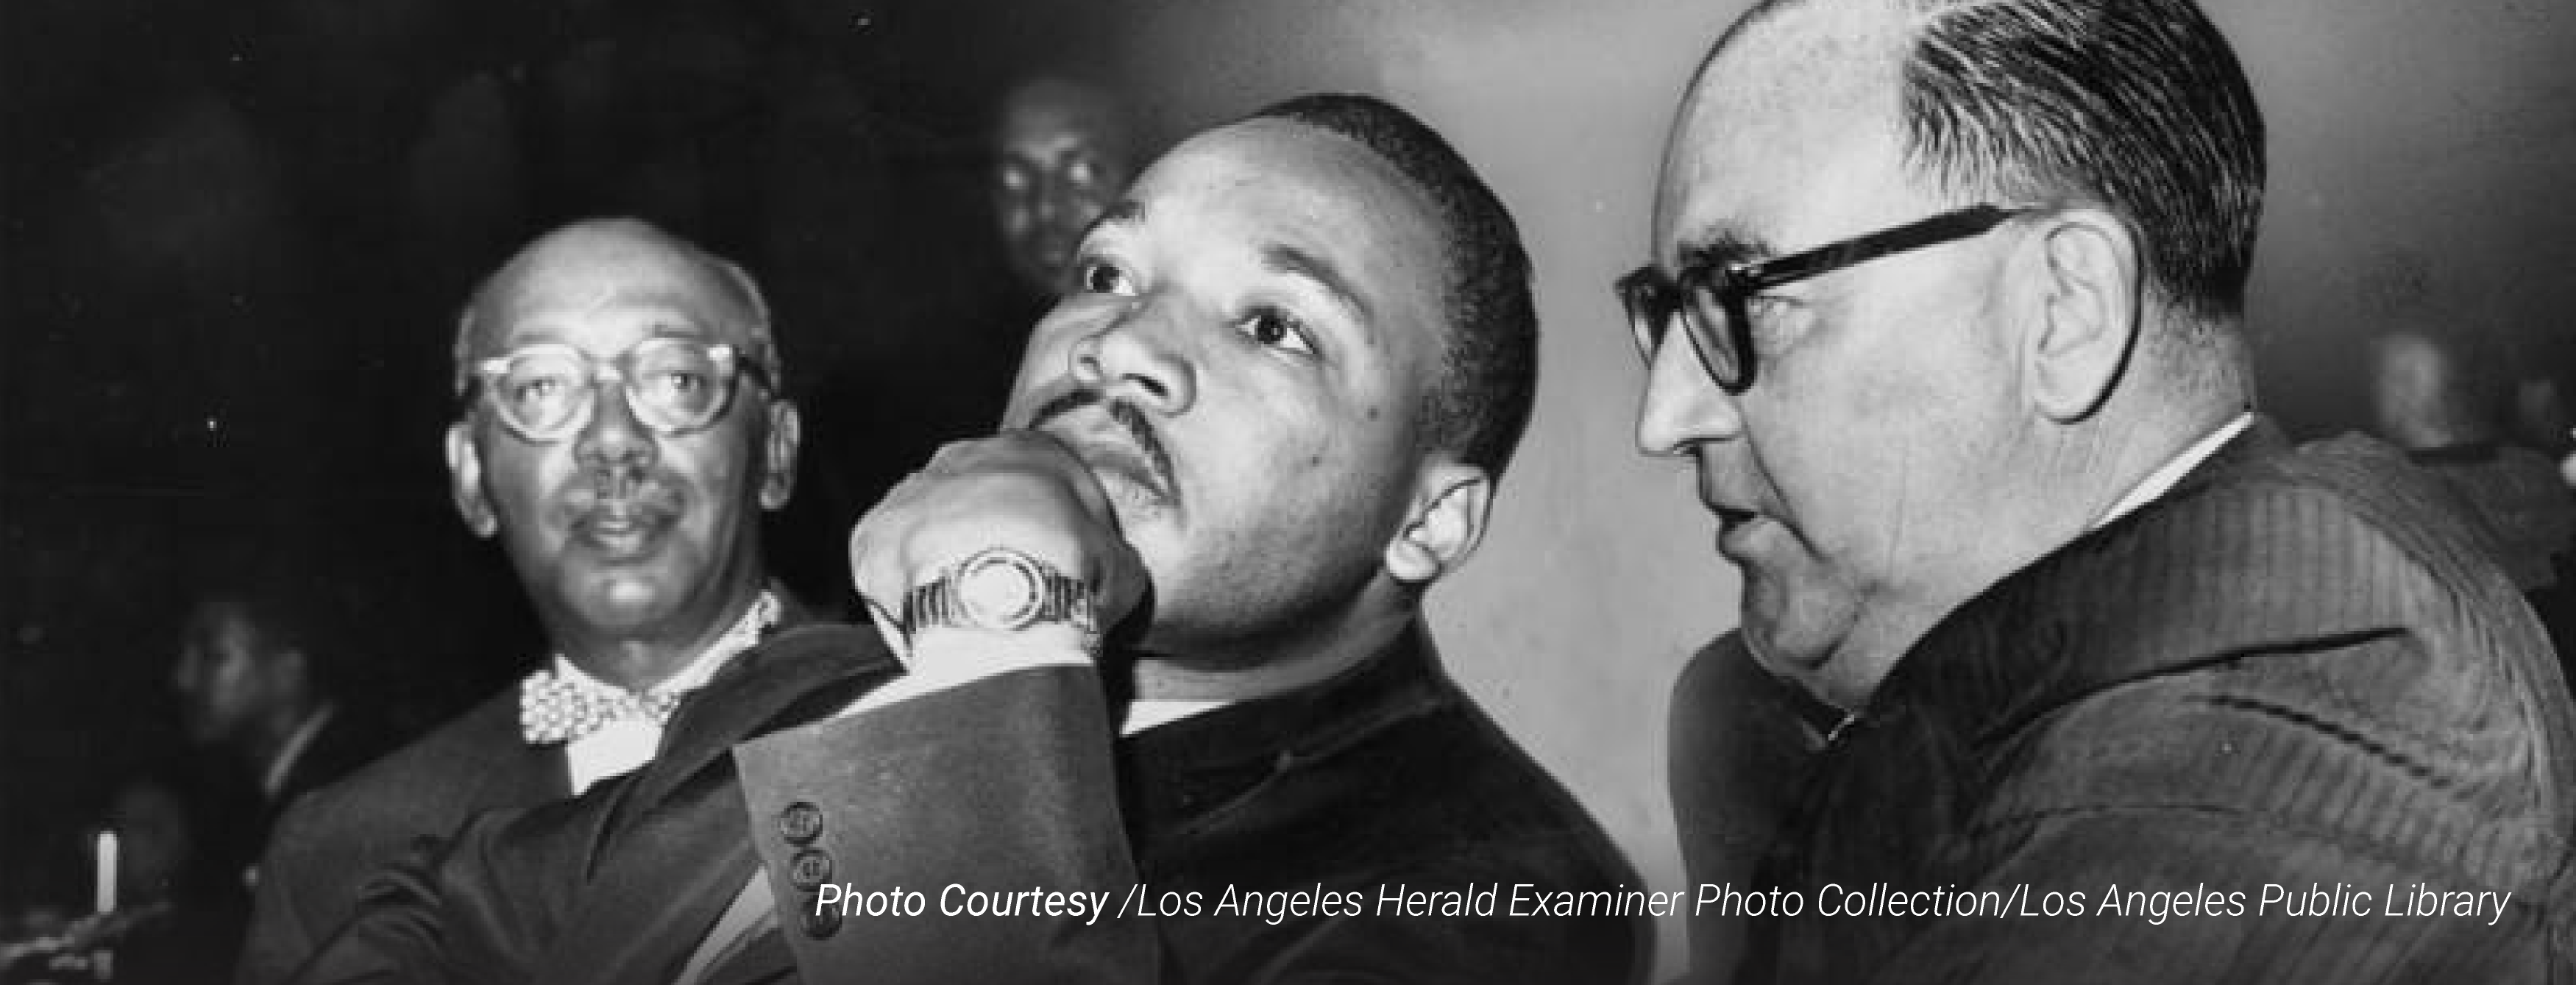  Martin Luther King Jr. and Governor Edmund G. Brown during a Freedom Rally at the Los Angeles Sports Arena June 18, 1961.